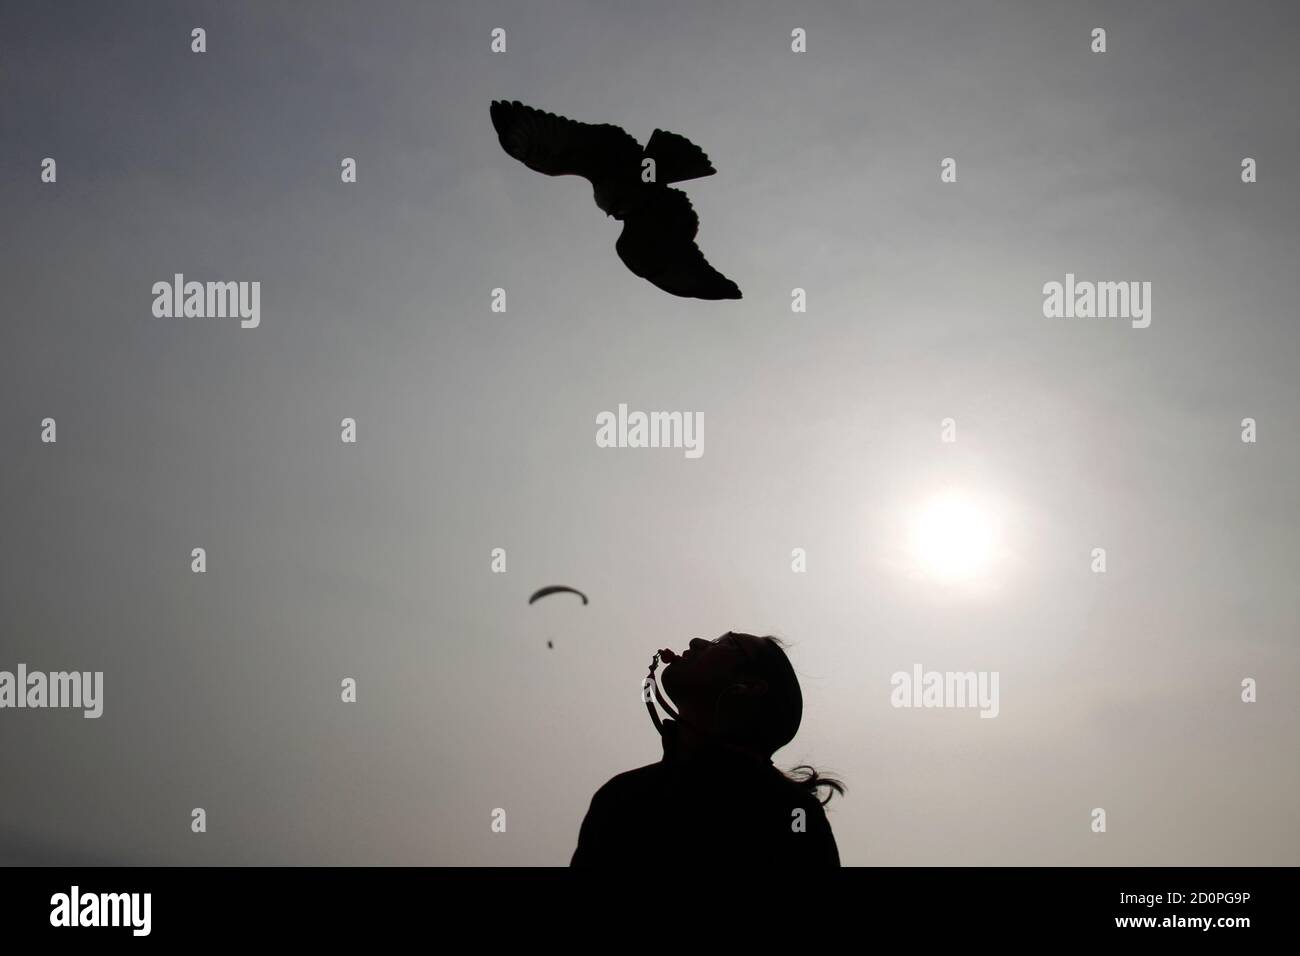 Peruvian Stanley Yep calls his red-backed hawk with a whistle at a paragliding park in Lima October 1, 2010. Yep trains his birds to do parahawking, where they fly with paragliders and guide them to the thermals.  REUTERS/Pilar Olivares (PERU - Tags: ANIMALS SOCIETY SPORT) Stock Photo